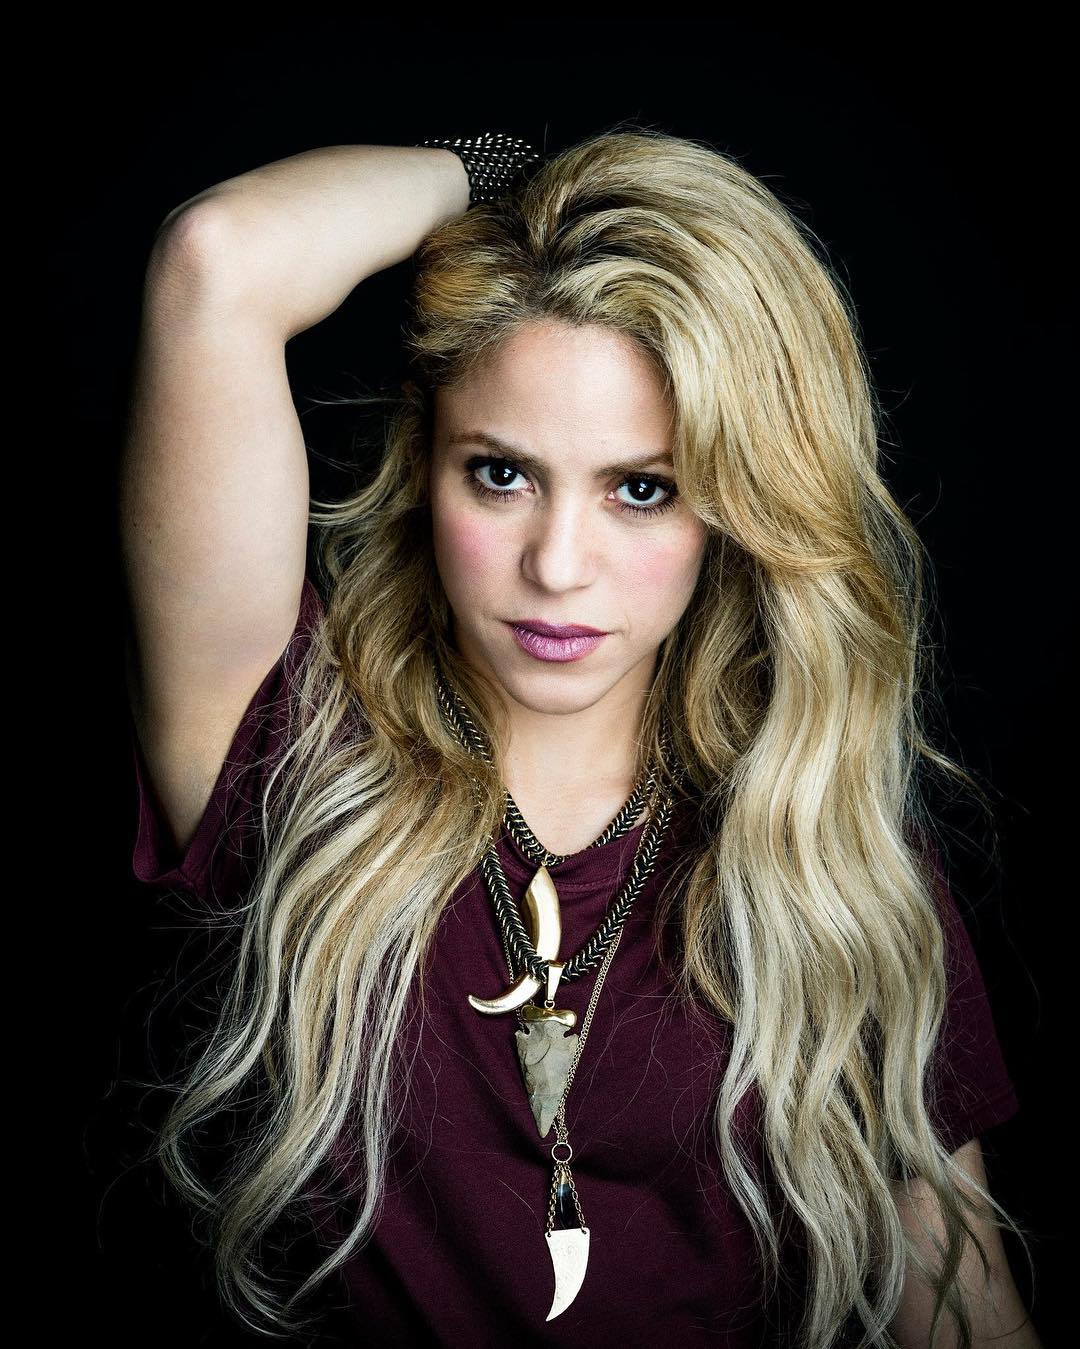 15 Pictures Of Shakira That Proves She Is Way Too Young To Be 41-Year-Old